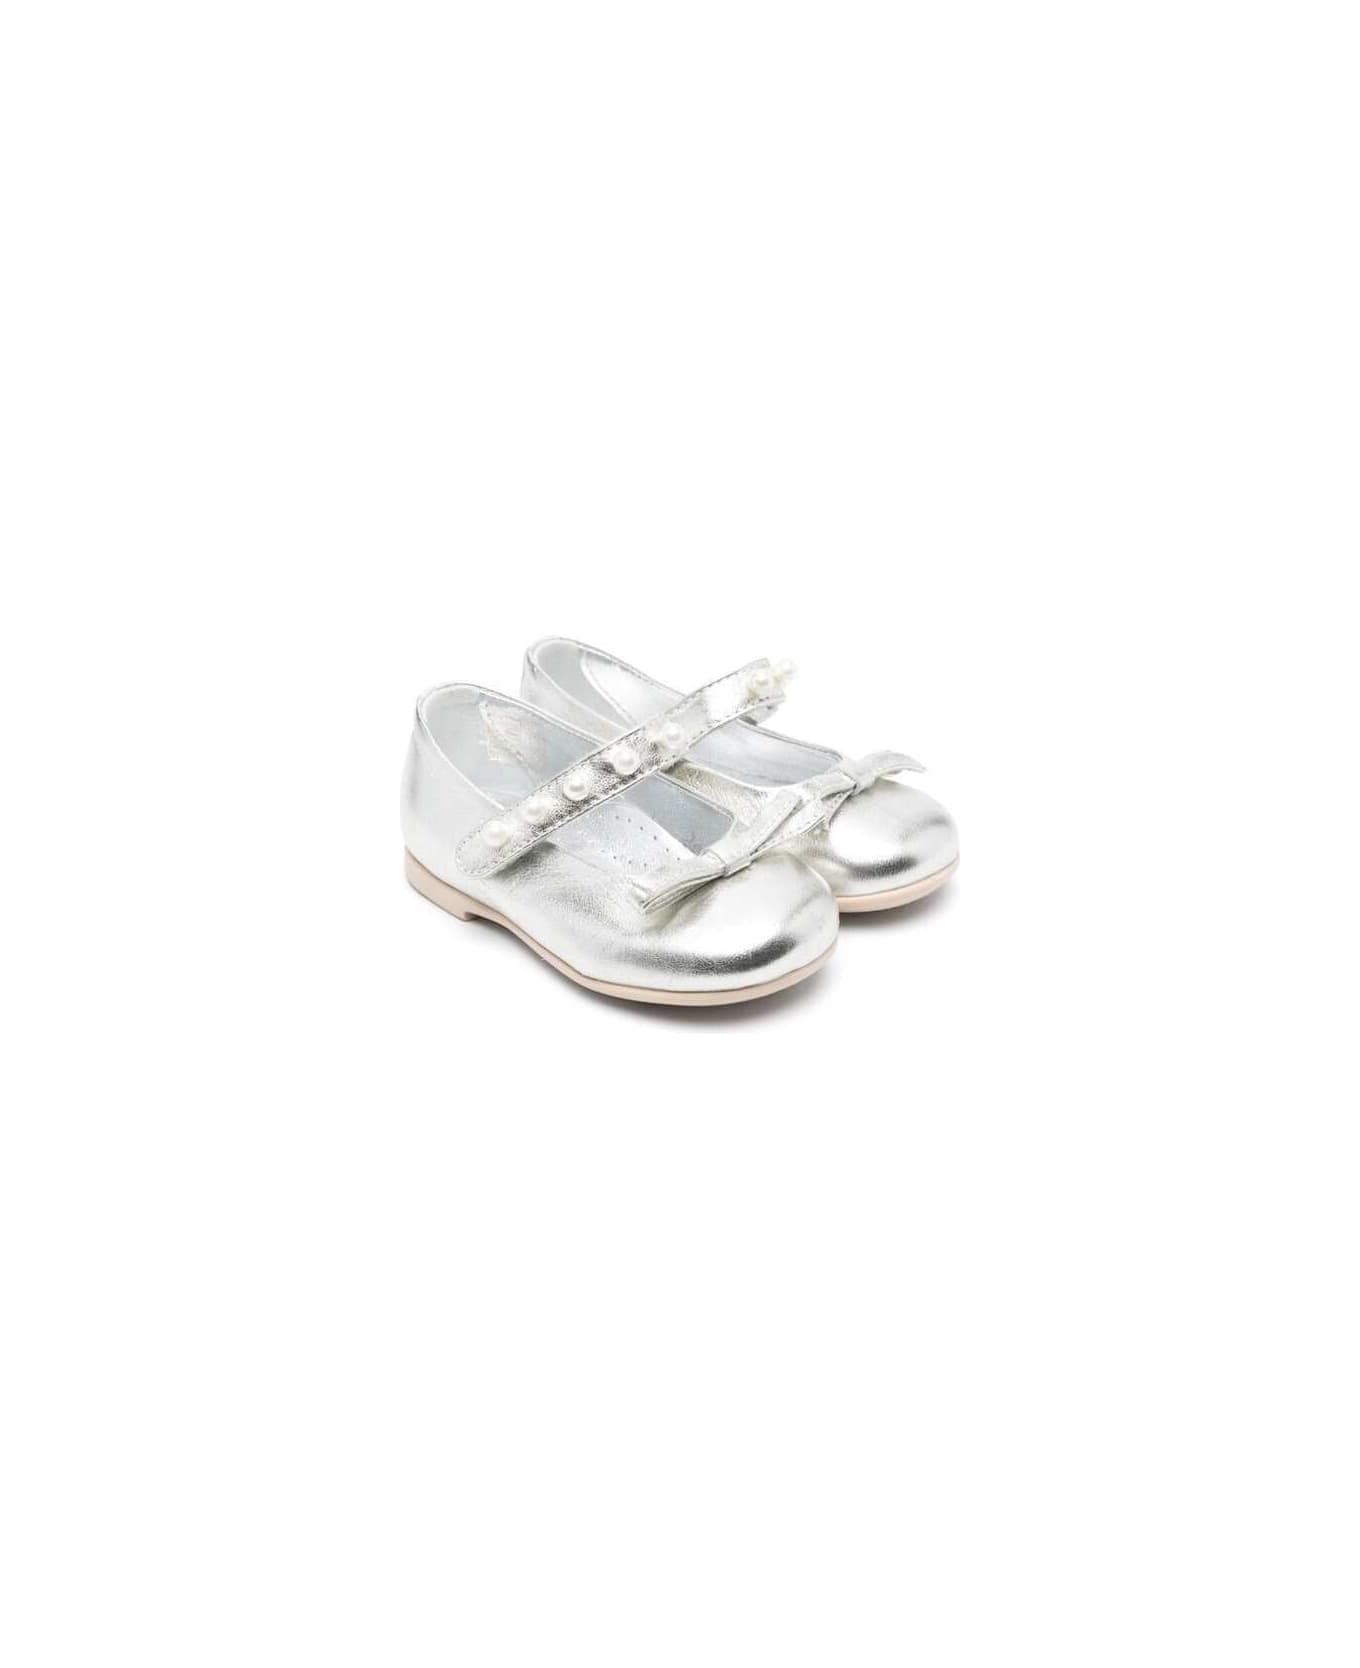 Monnalisa Silver Ballet Flats With Pearls And Bow Detail In Laminated Leather Girl - Metallic